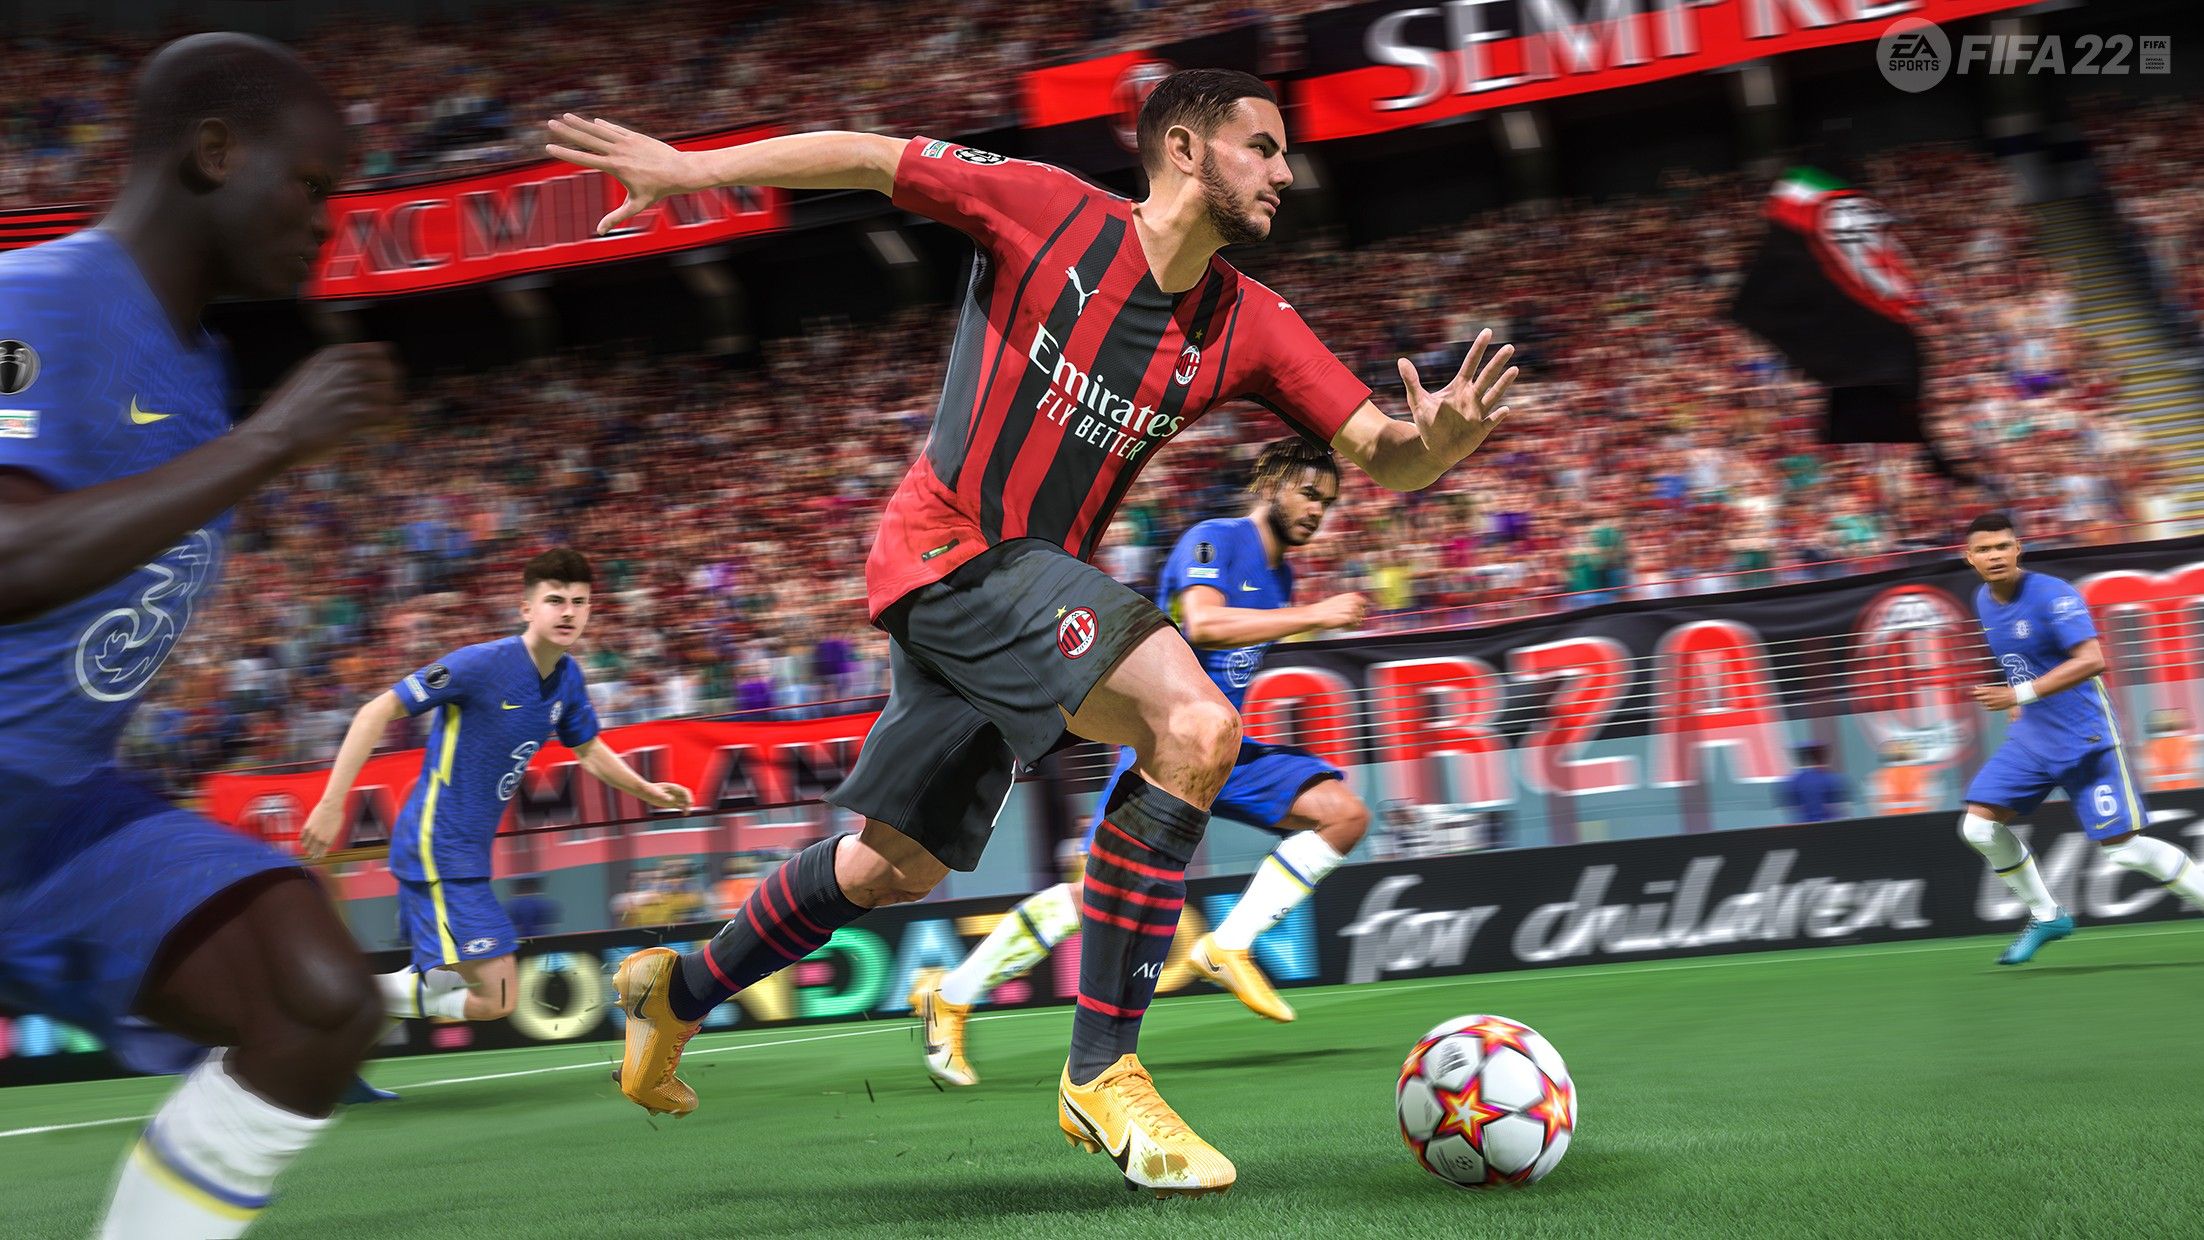 FIFA in game footage of AC Milan defender, Theo Hernandez dribbling the ball past several Chelsea players